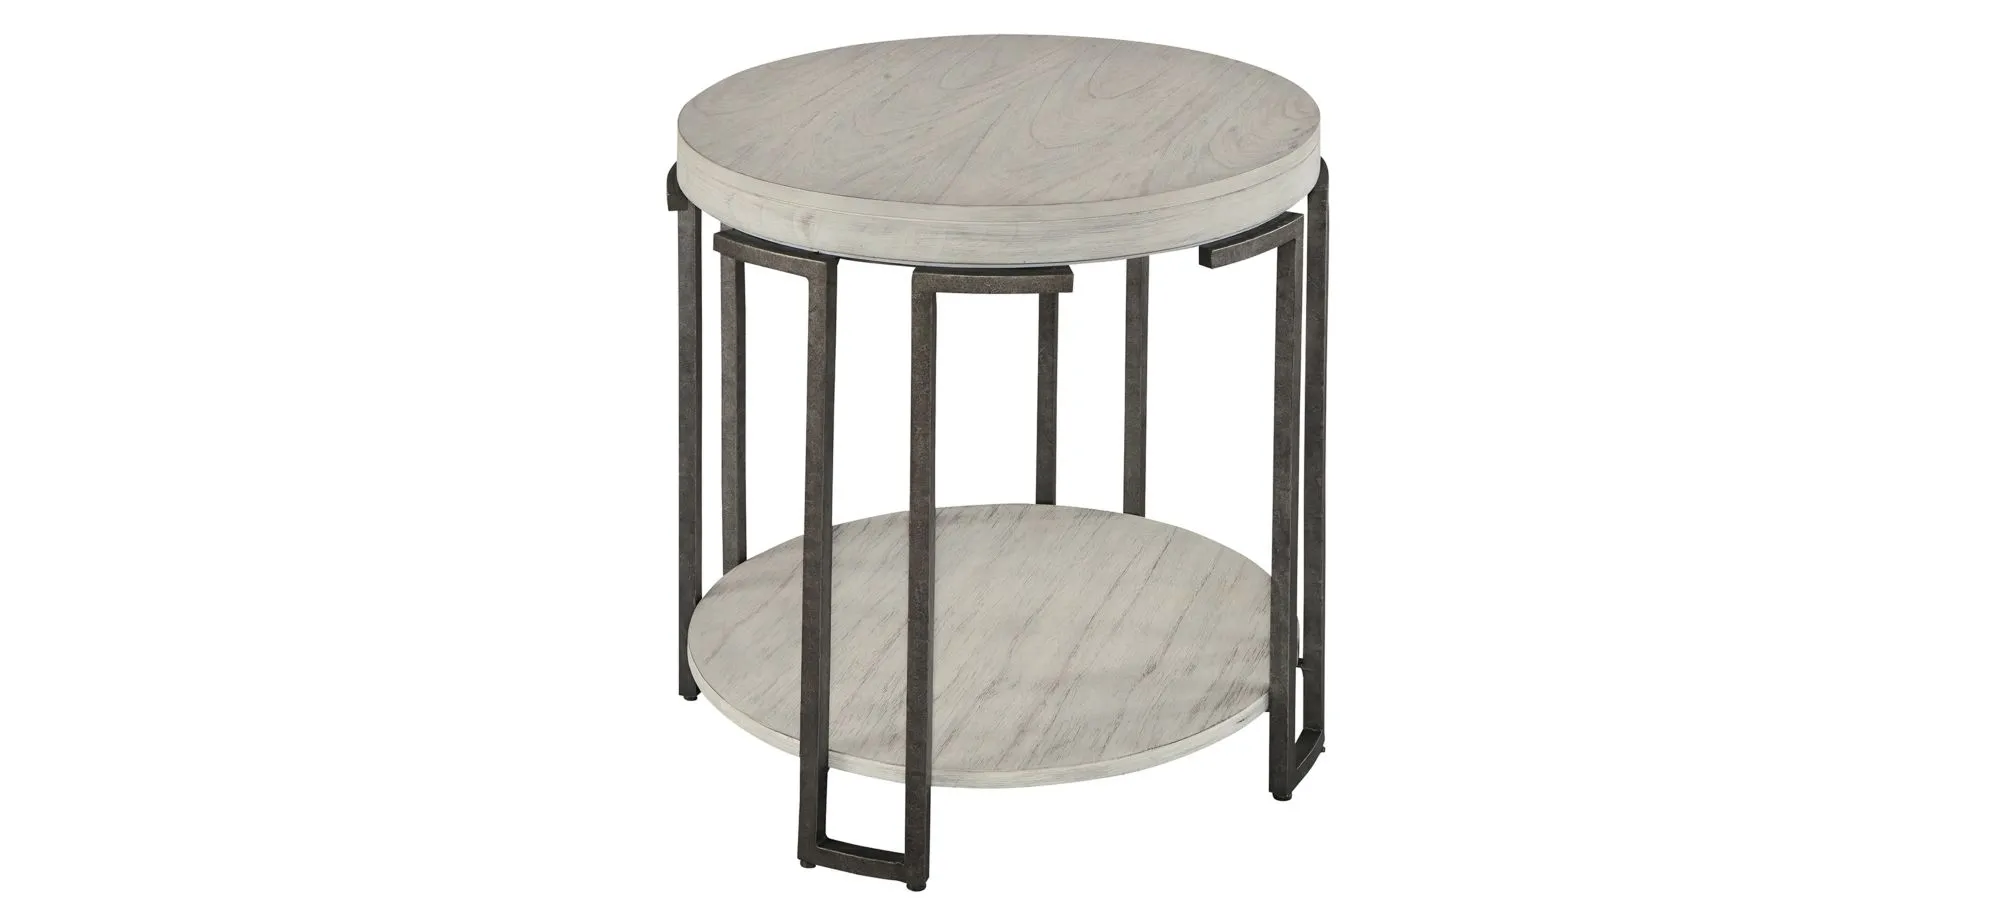 Sierra Heights Round End Table in SIERRA HEIGHTS by Hekman Furniture Company